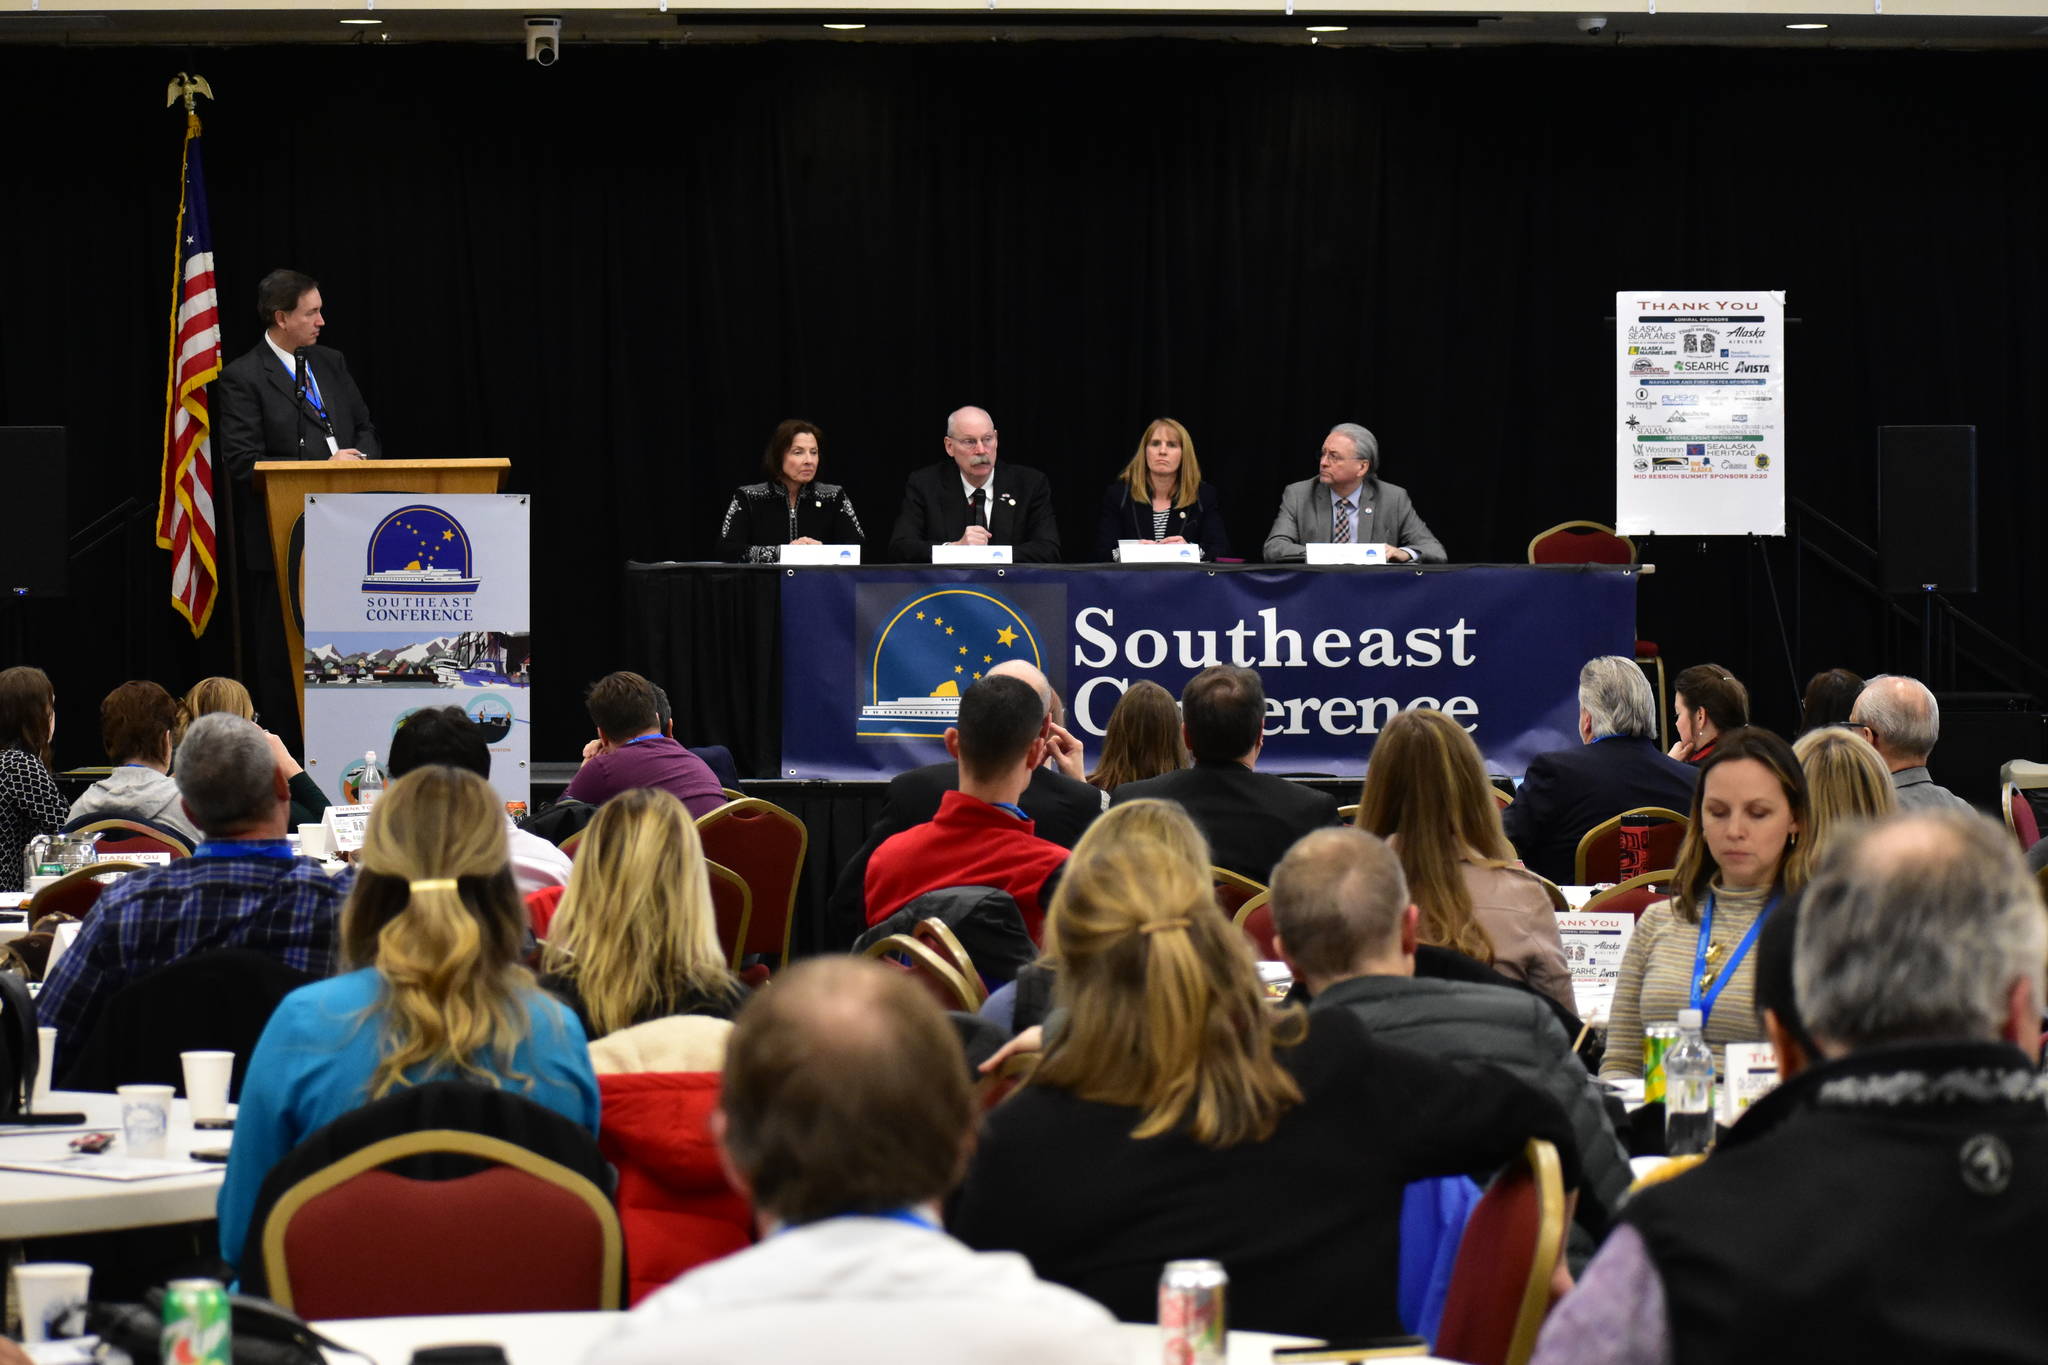 Sens. Cathy Giessel, R-Anchorage, Bert Stedman, R-Sitka, Natasha Von Imhof, R-Anchorage and Tom Begich, D-Anchorage, speak at Southeast Conference’s mid-session summit at Elizabeth Peratrovich Hall on Tuesday, Feb. 4, 2020. (Peter Segall | Juneau Empire)